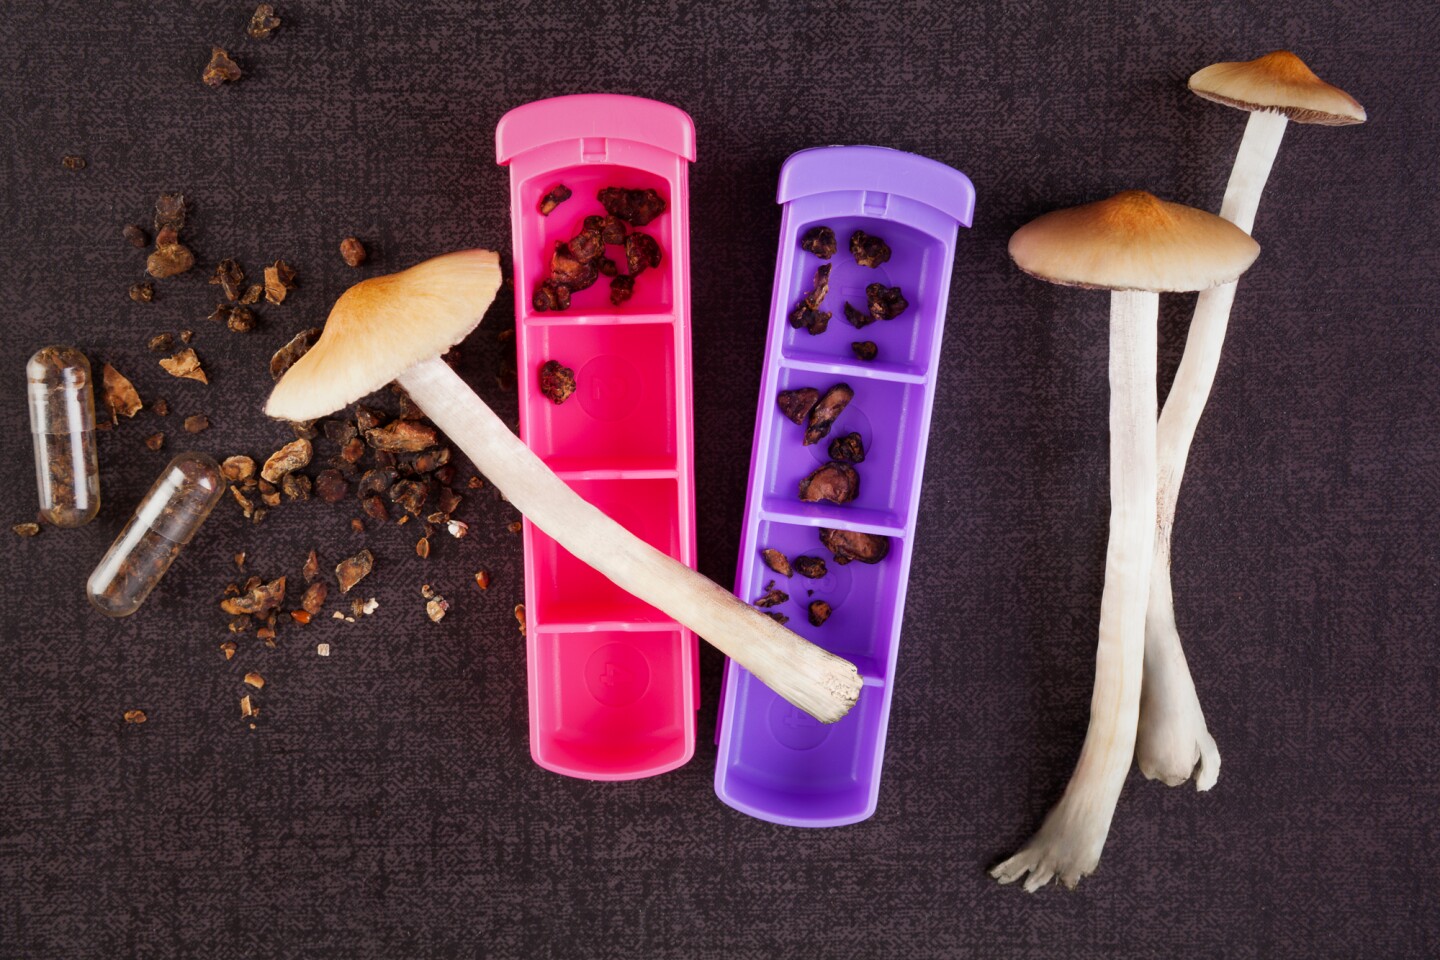 For the first time, a trial has directly compared the efficacy of psychedelic psilocybin psychotherapy for depression against a common antidepressant medication